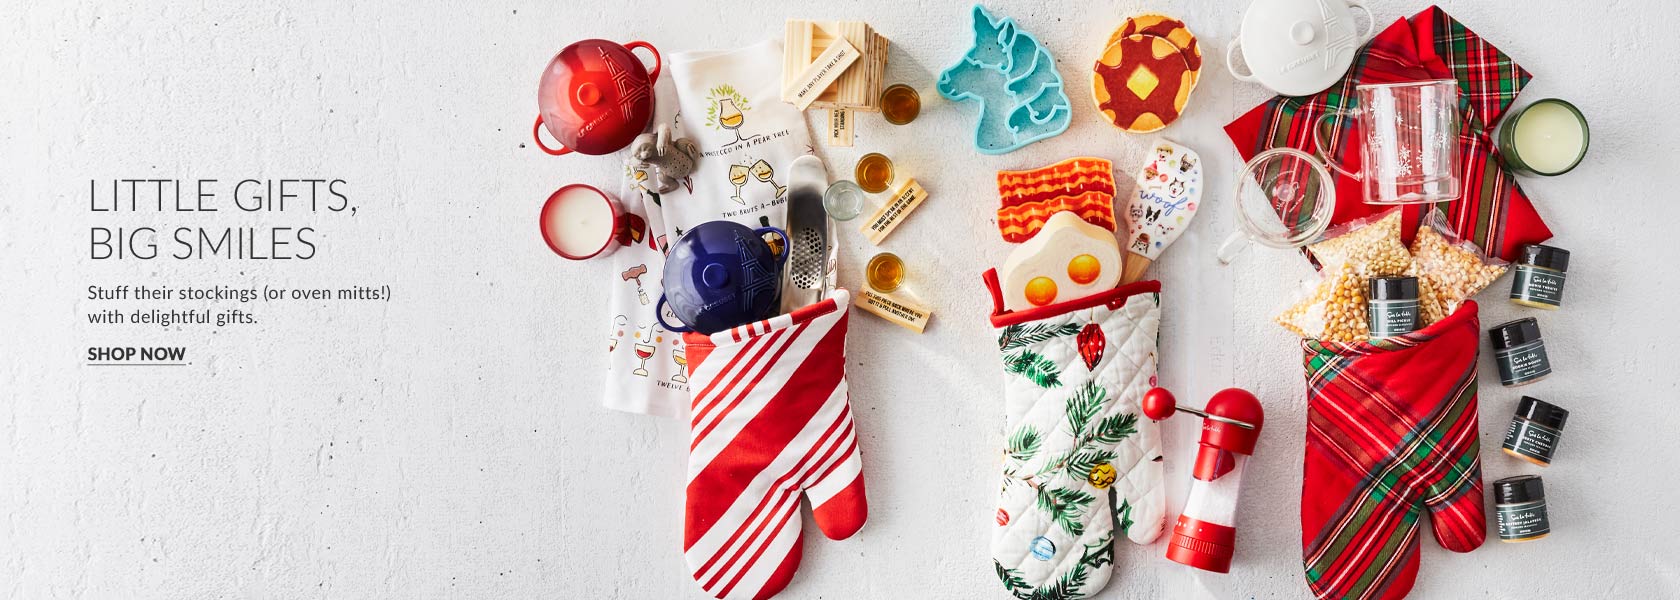 Little Gifts, Big Smiles. Stuff their stockings (or oven mitts!) with delightful gifts Galore holiday gifting at Sur La Table. Shop Now.